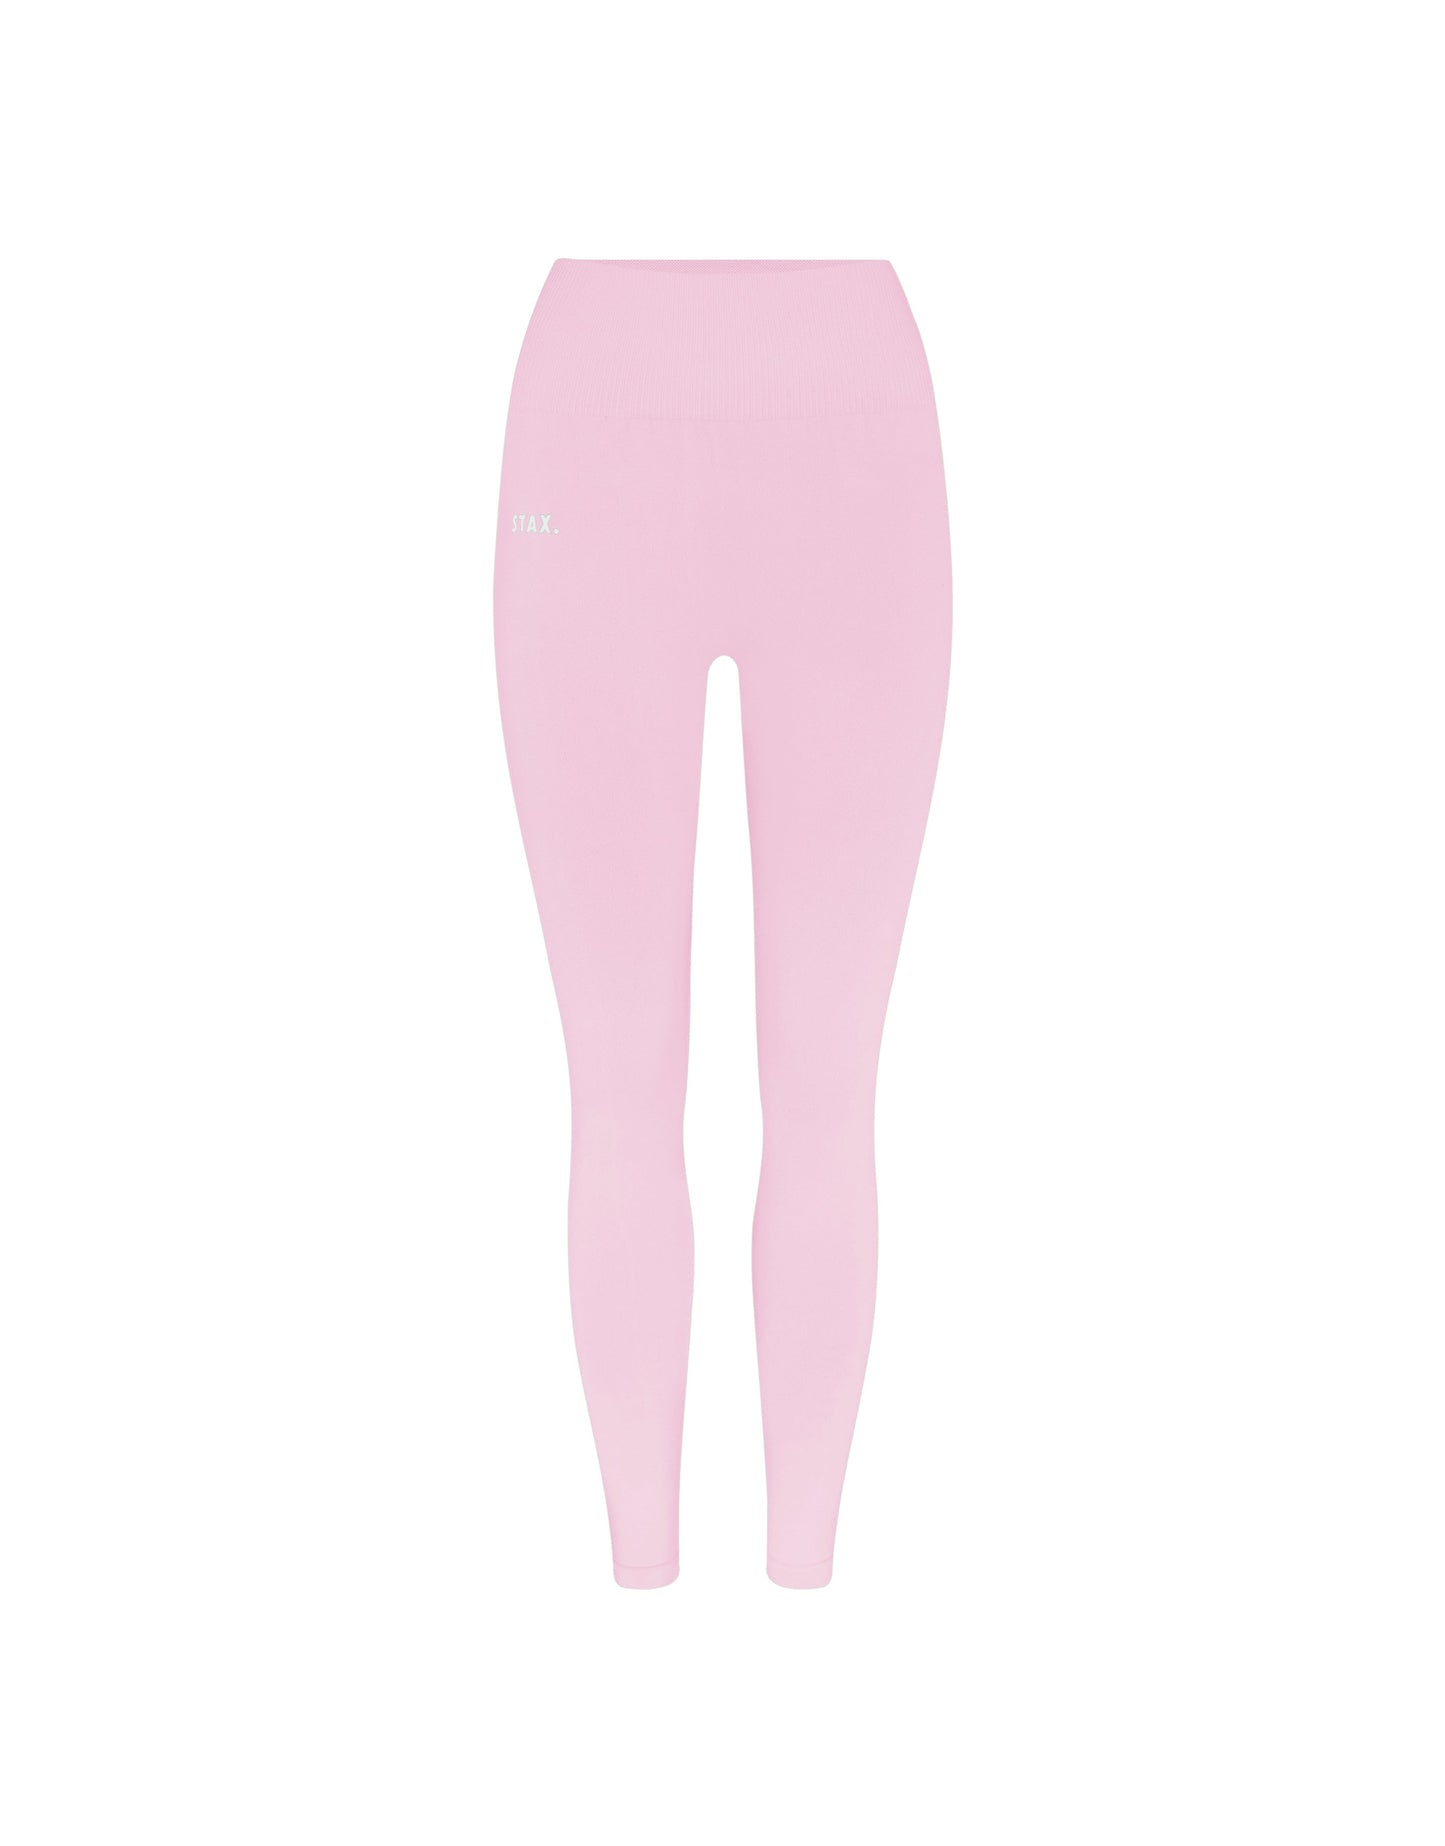 STAX. Premium Seamless V5.1 (Favourites) Full Length Tights - Taffy (Pink)